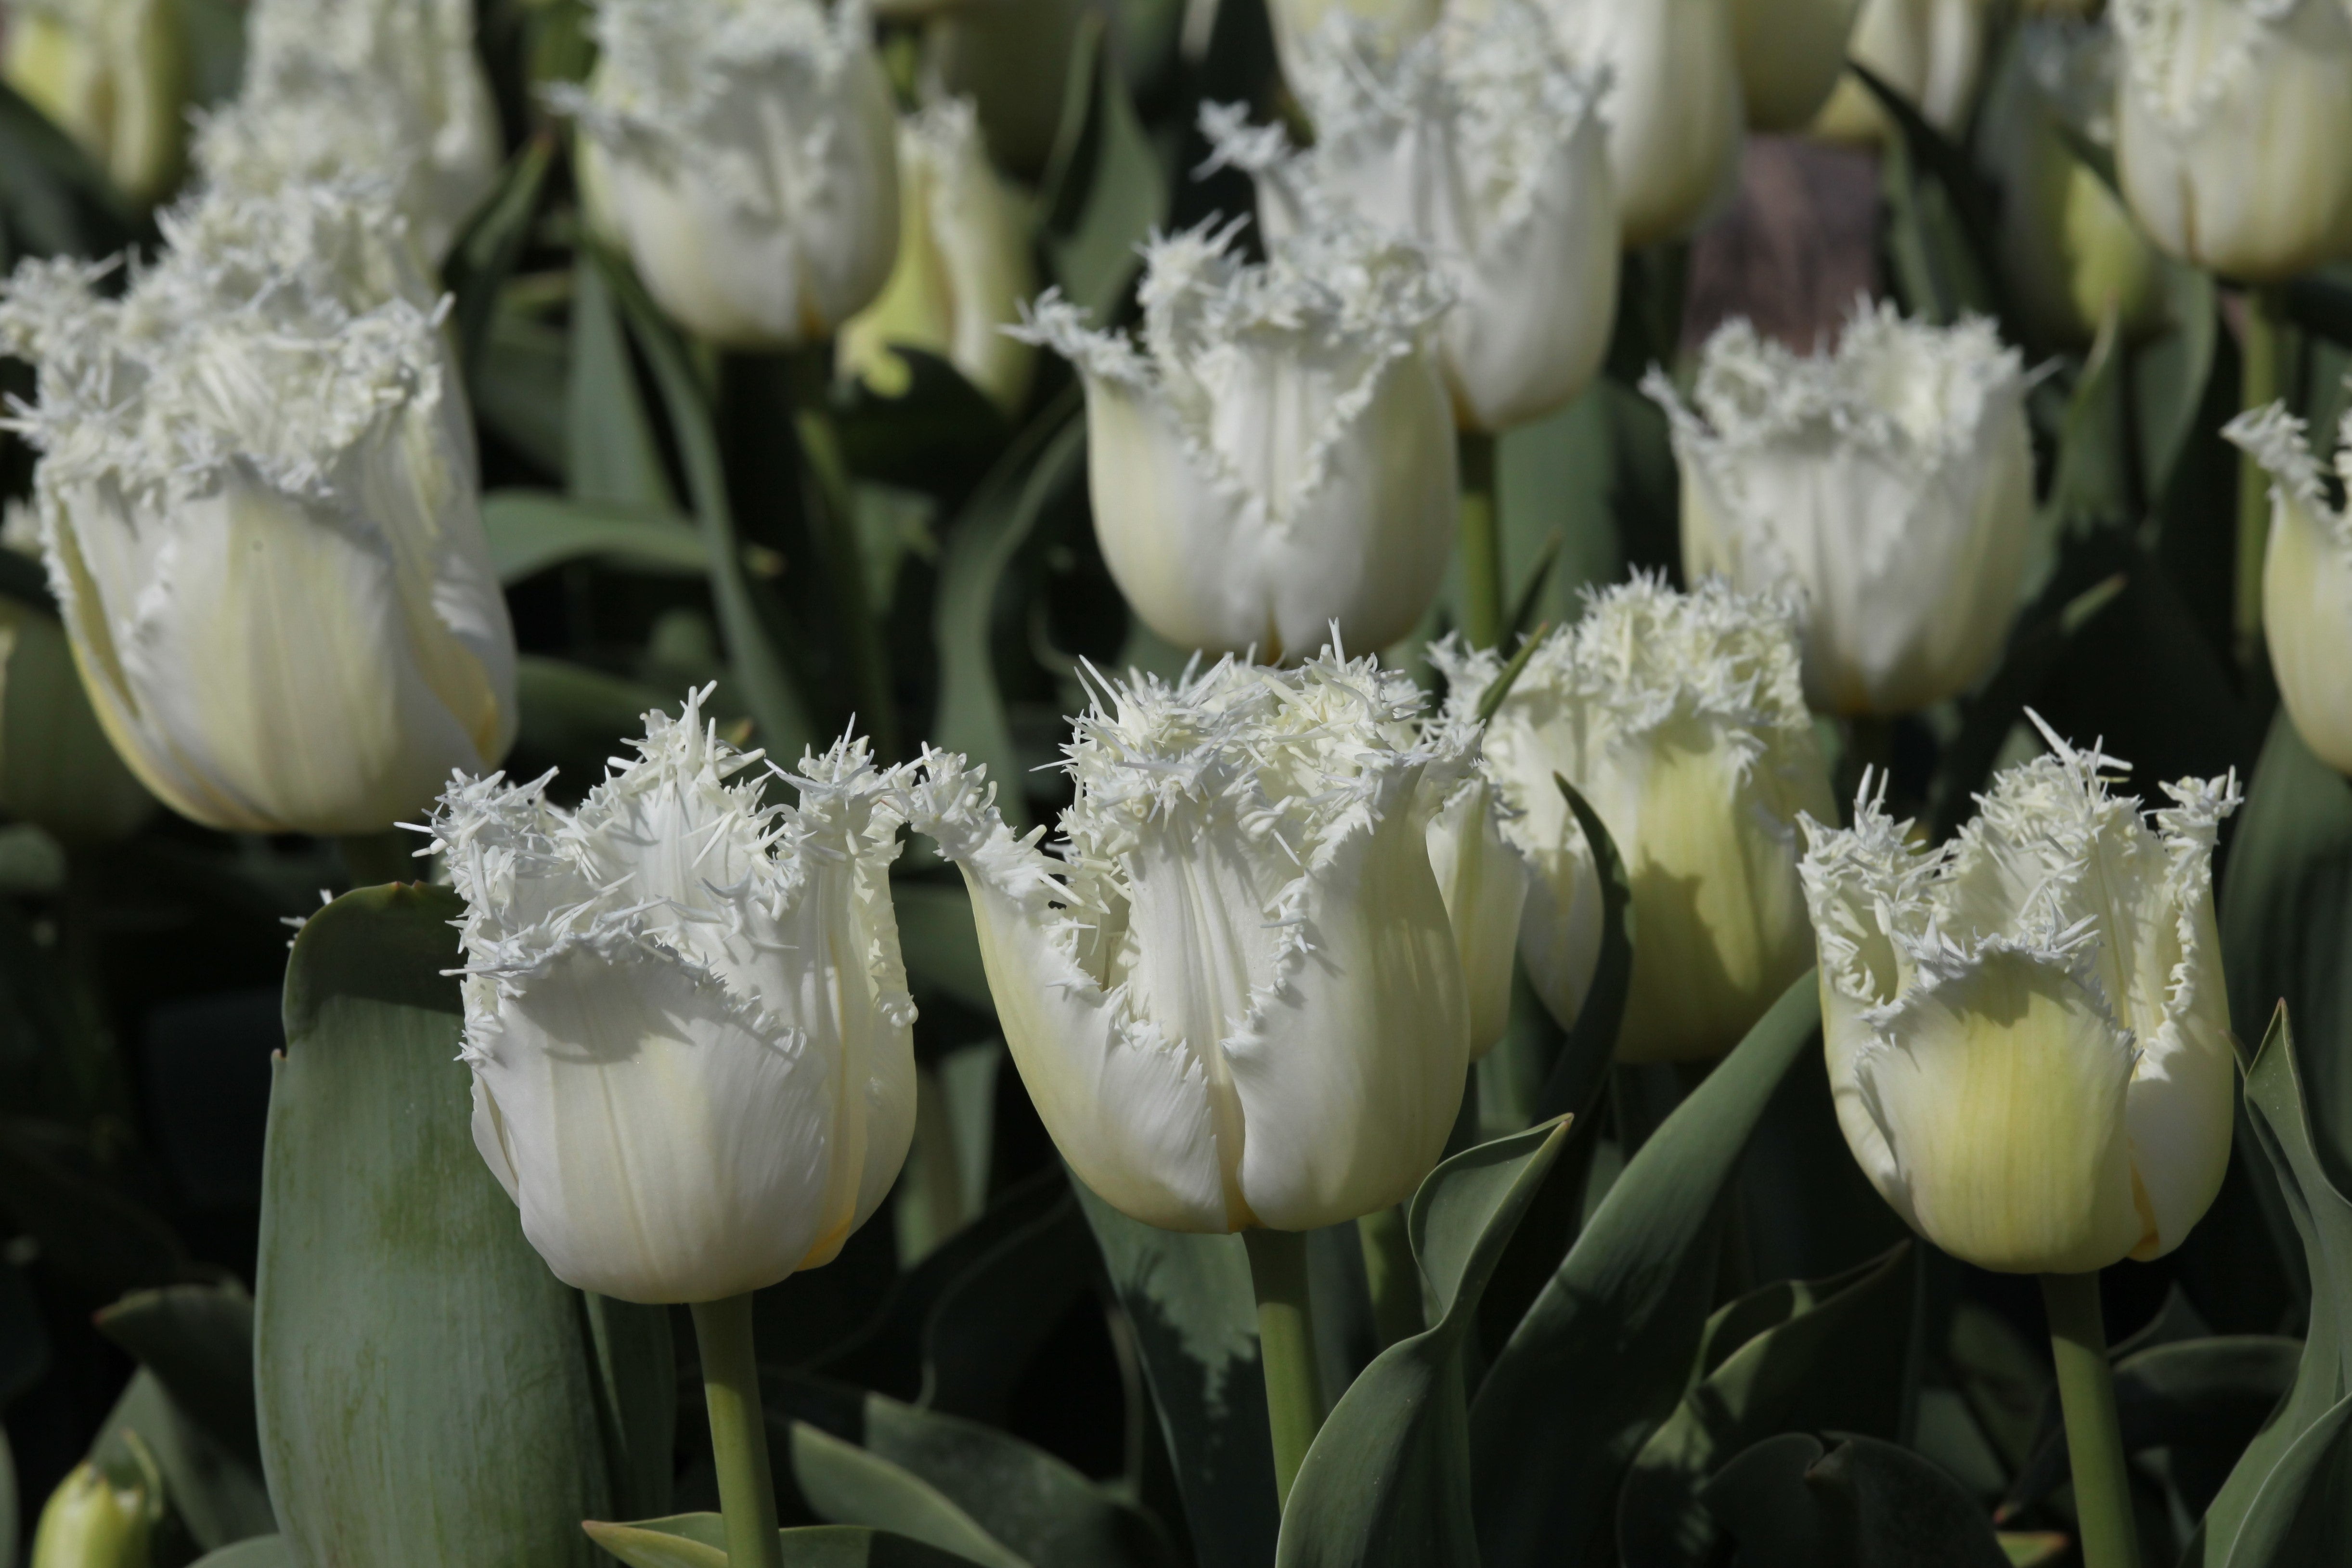 A stunning fringed tulip called North pole, standing on strong, green stems